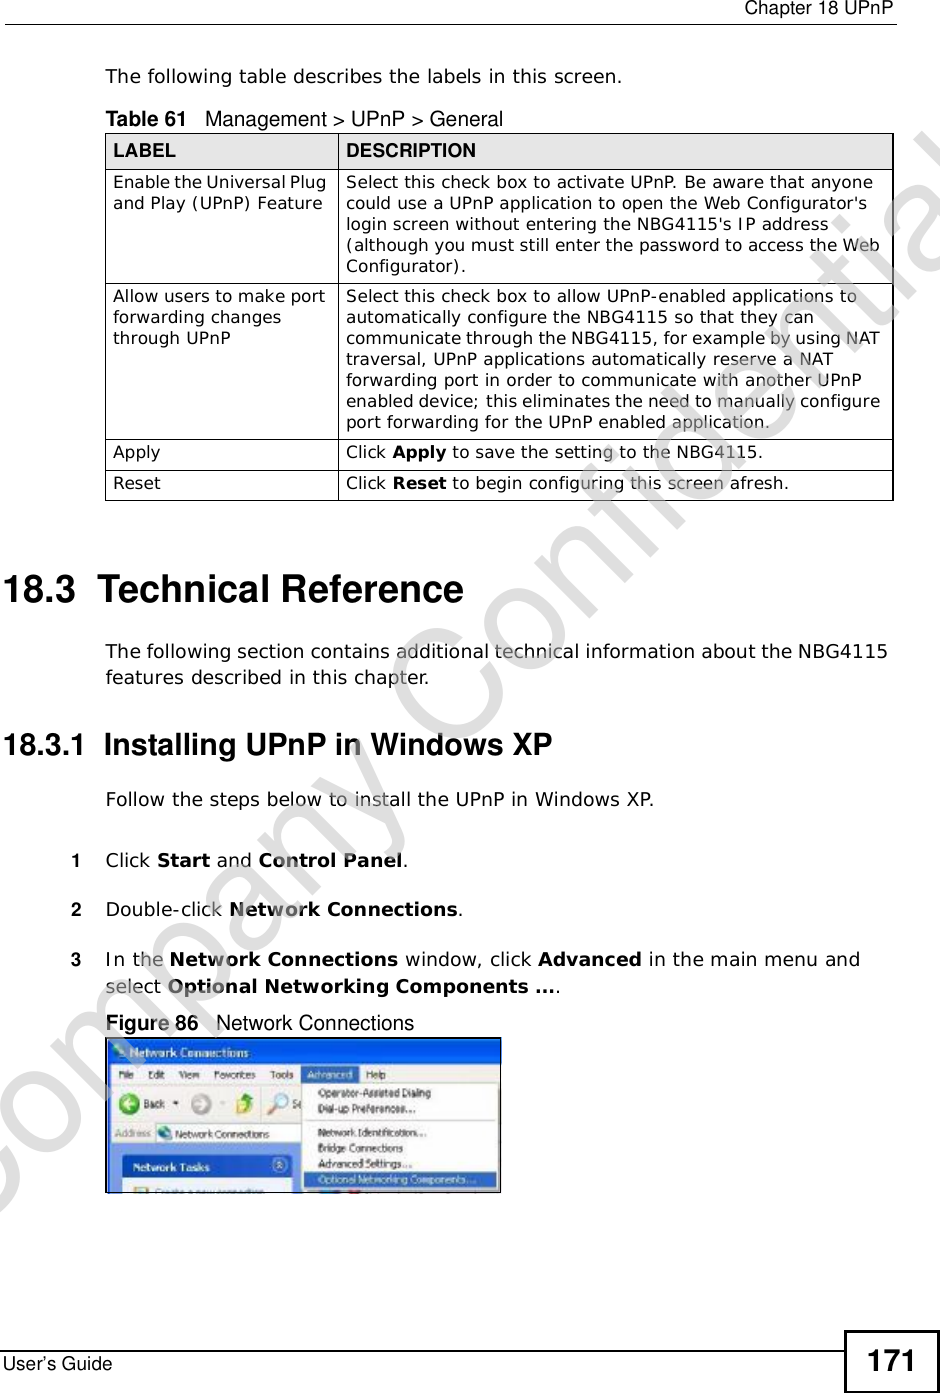  Chapter 18UPnPUser’s Guide 171The following table describes the labels in this screen. 18.3  Technical ReferenceThe following section contains additional technical information about the NBG4115 features described in this chapter.18.3.1  Installing UPnP in Windows XPFollow the steps below to install the UPnP in Windows XP.1Click Start and Control Panel.2Double-click Network Connections.3In the Network Connections window, click Advanced in the main menu and select Optional Networking Components ….Figure 86   Network ConnectionsTable 61   Management &gt; UPnP &gt; GeneralLABEL DESCRIPTIONEnable the Universal Plug and Play (UPnP) Feature Select this check box to activate UPnP. Be aware that anyone could use a UPnP application to open the Web Configurator&apos;s login screen without entering the NBG4115&apos;s IP address (although you must still enter the password to access the Web Configurator).Allow users to make port forwarding changes through UPnPSelect this check box to allow UPnP-enabled applications to automatically configure the NBG4115 so that they can communicate through the NBG4115, for example by using NAT traversal, UPnP applications automatically reserve a NAT forwarding port in order to communicate with another UPnP enabled device; this eliminates the need to manually configure port forwarding for the UPnP enabled application. Apply Click Apply to save the setting to the NBG4115.Reset Click Reset to begin configuring this screen afresh.Company Confidential